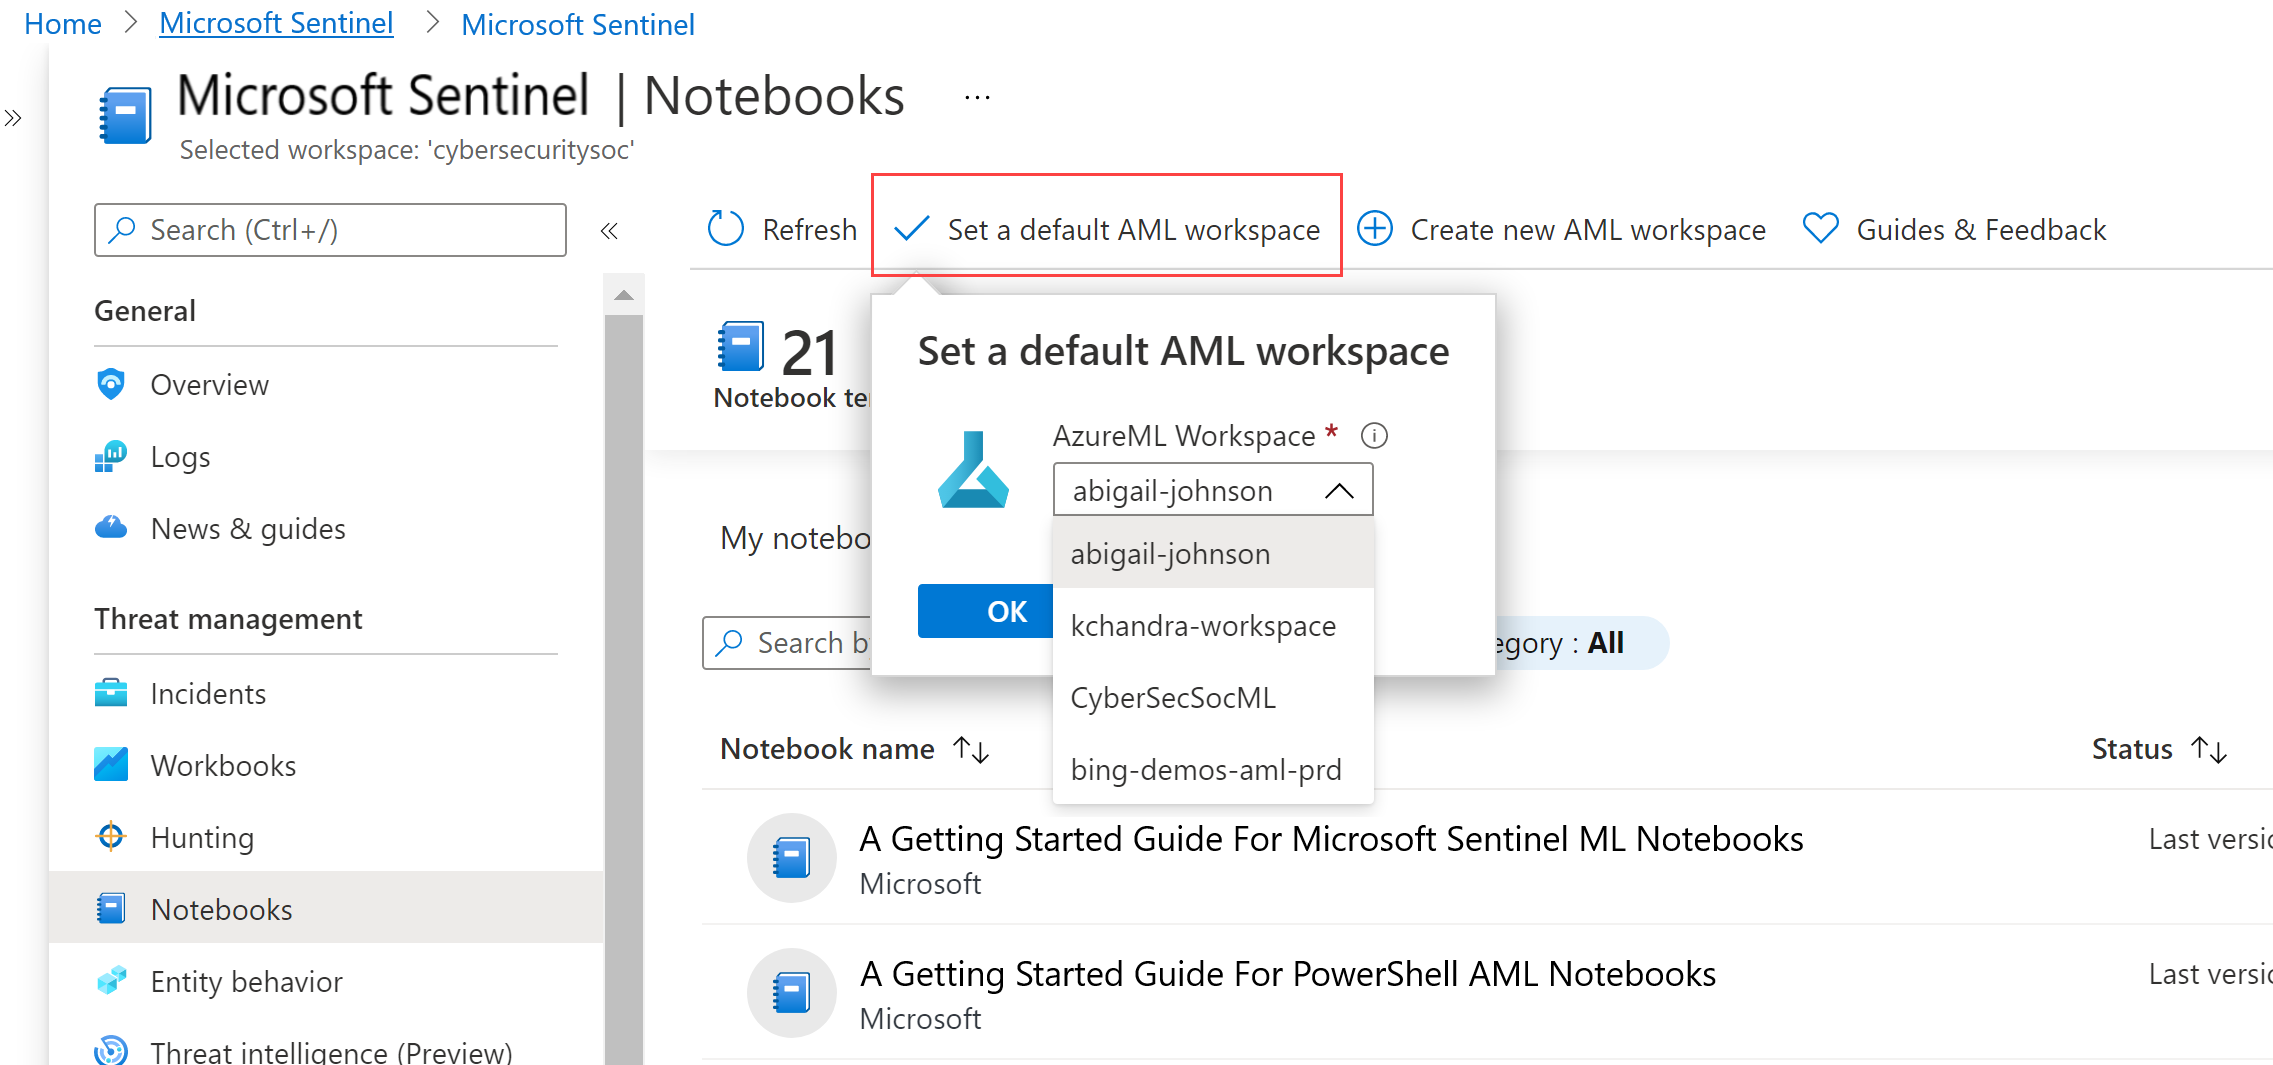 Select a default AML workspace for your notebooks.